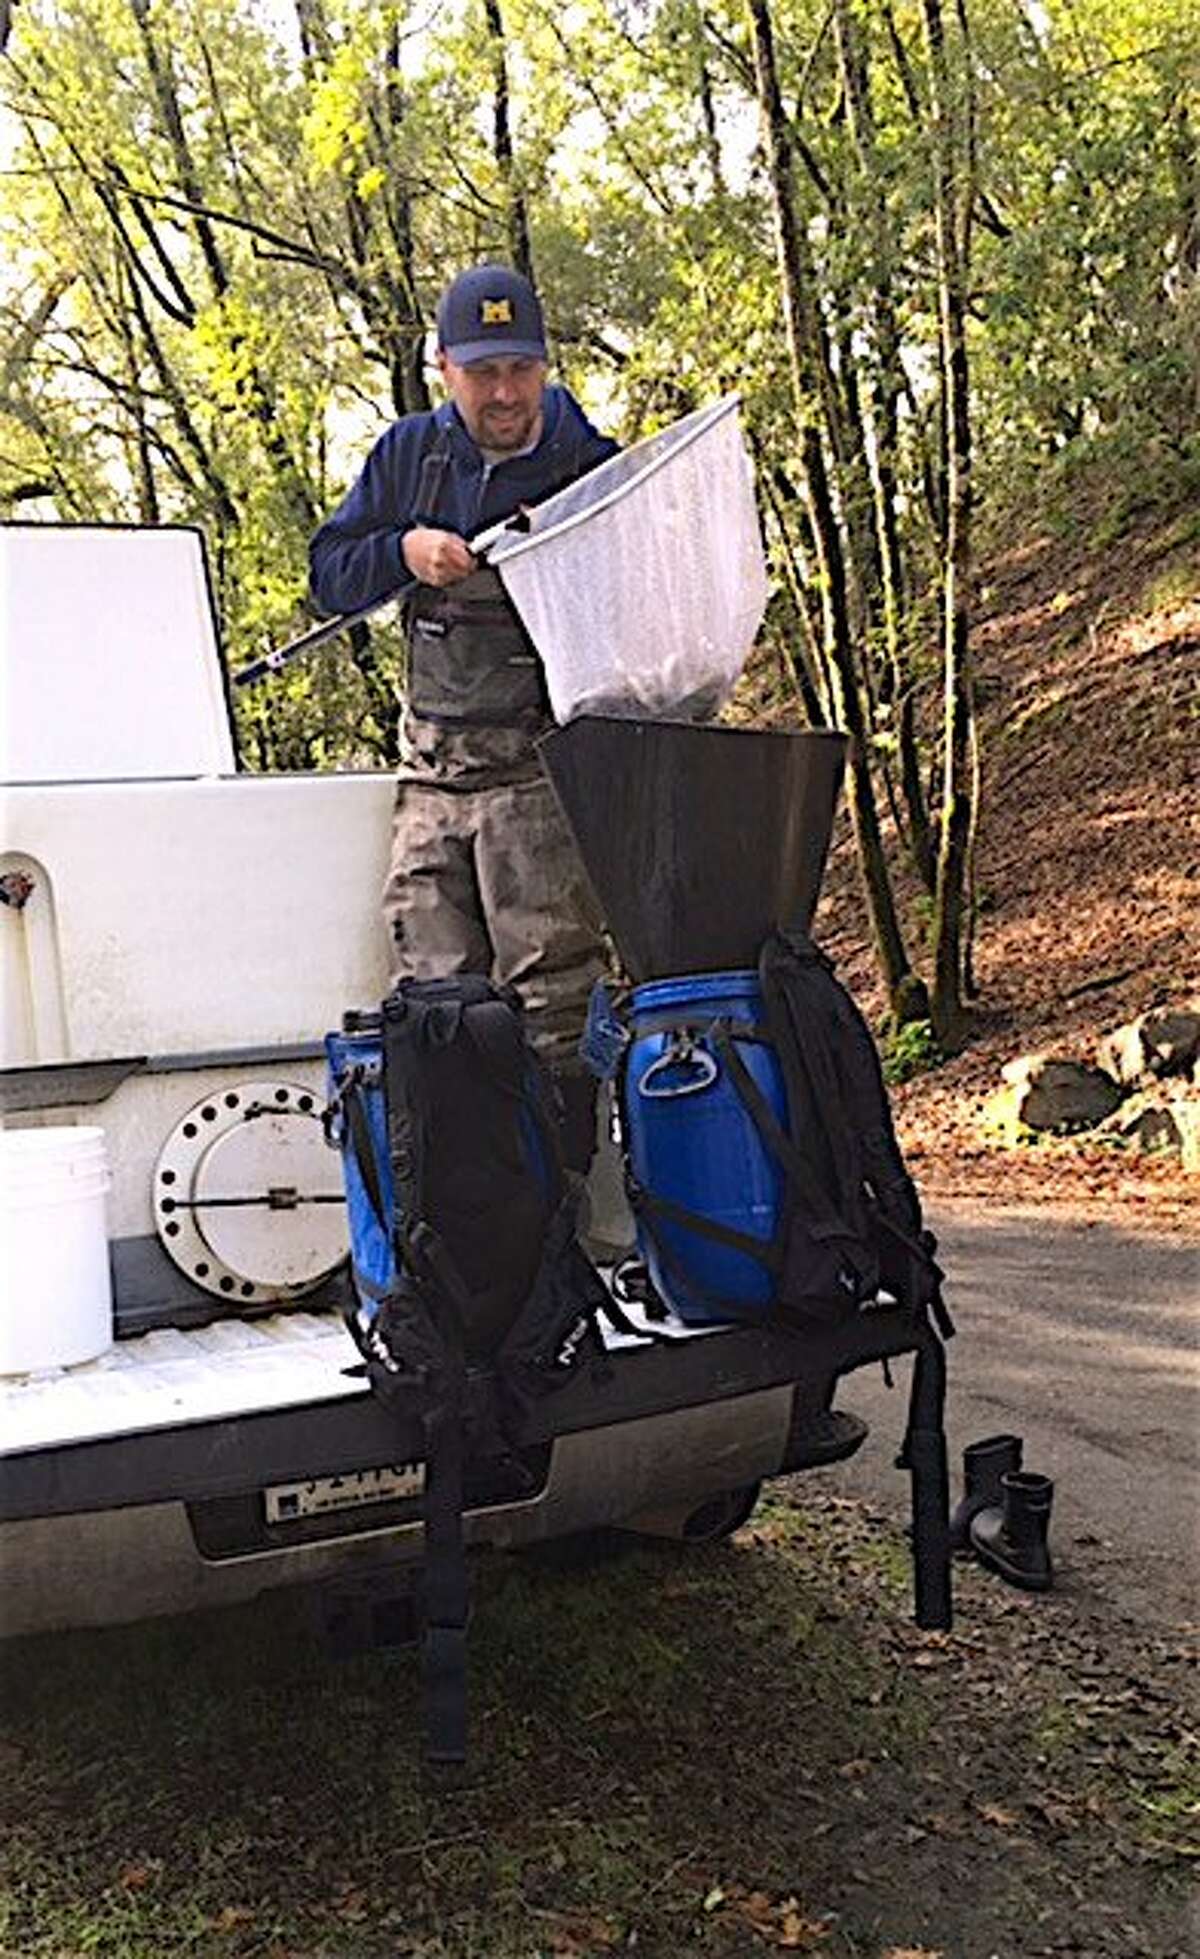 A volunteers loads coho salmon smolt into a container in a backpage, for transport to Porter Creek, a tributary to the Russian River in Sonoma County, to help jump-start the river's coho restoration